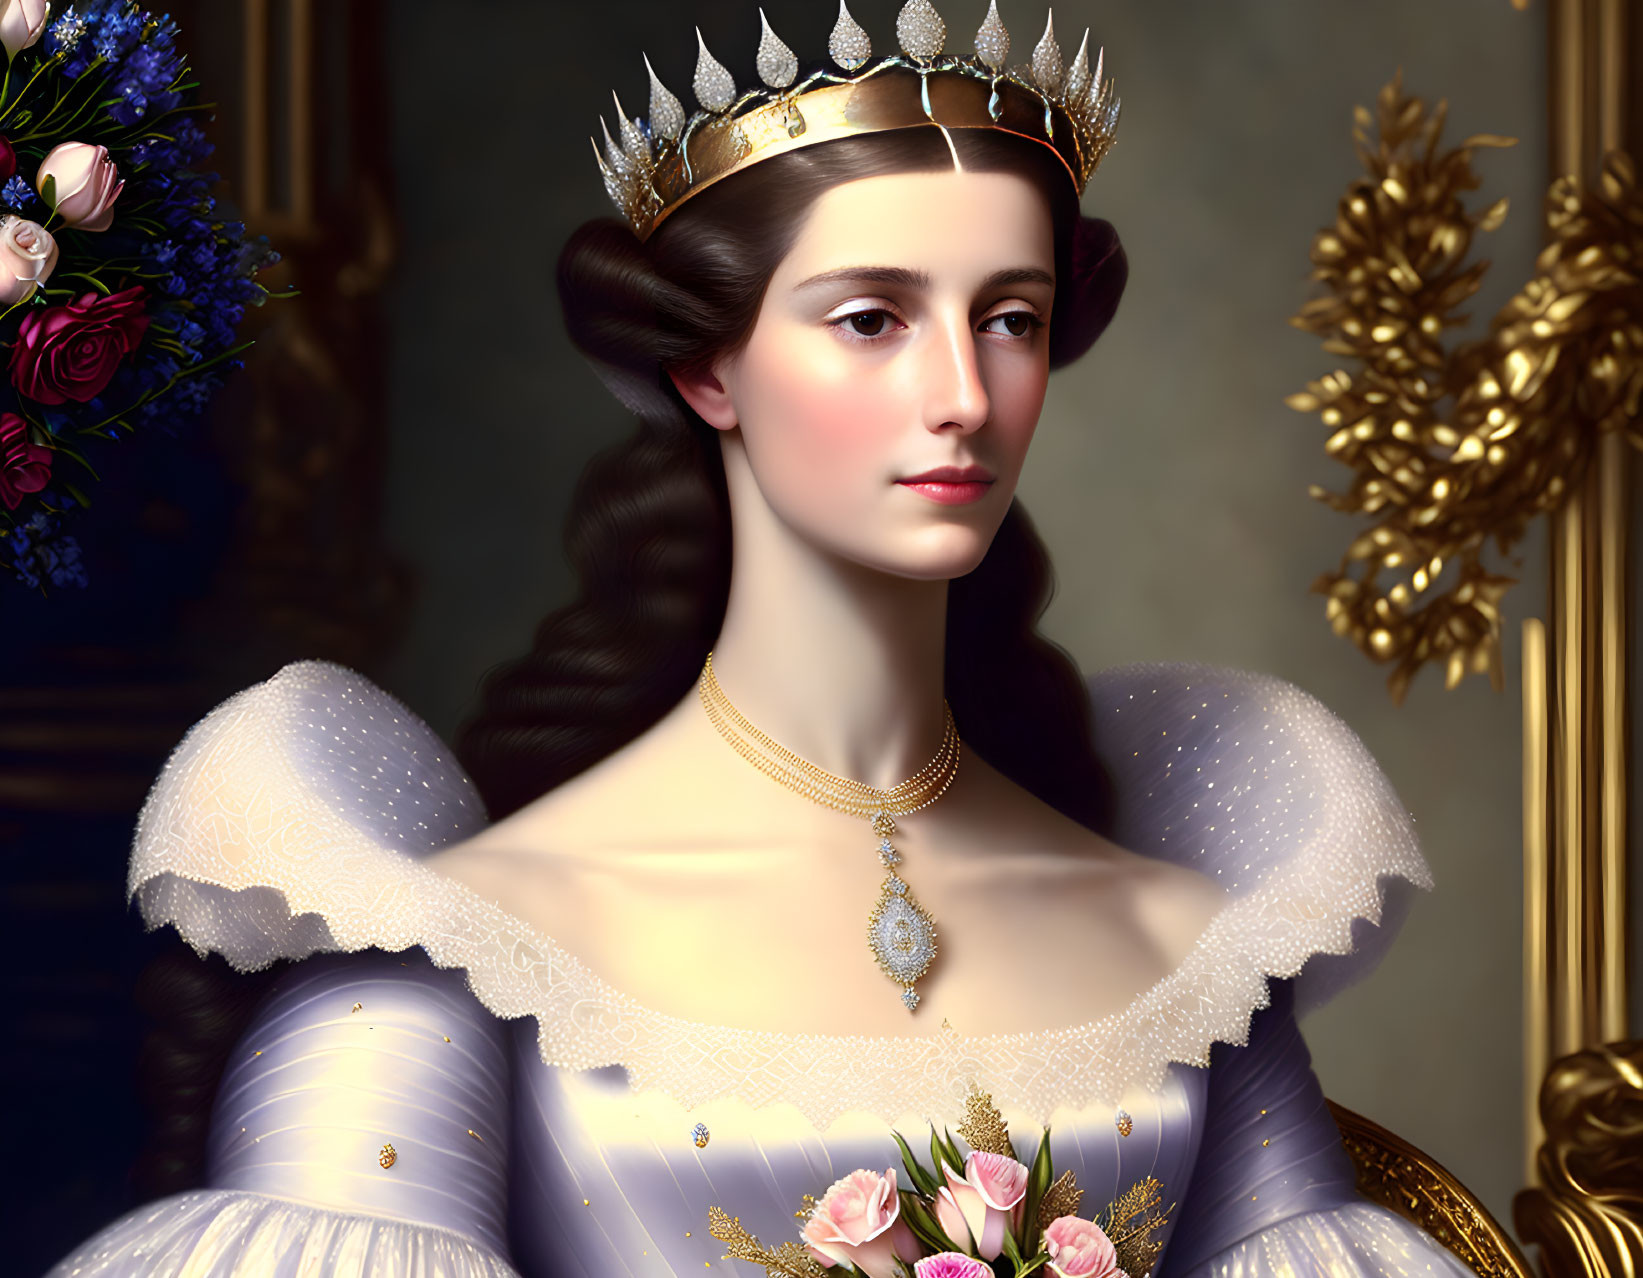 Anne queen of France in a crown with diamonds, blo